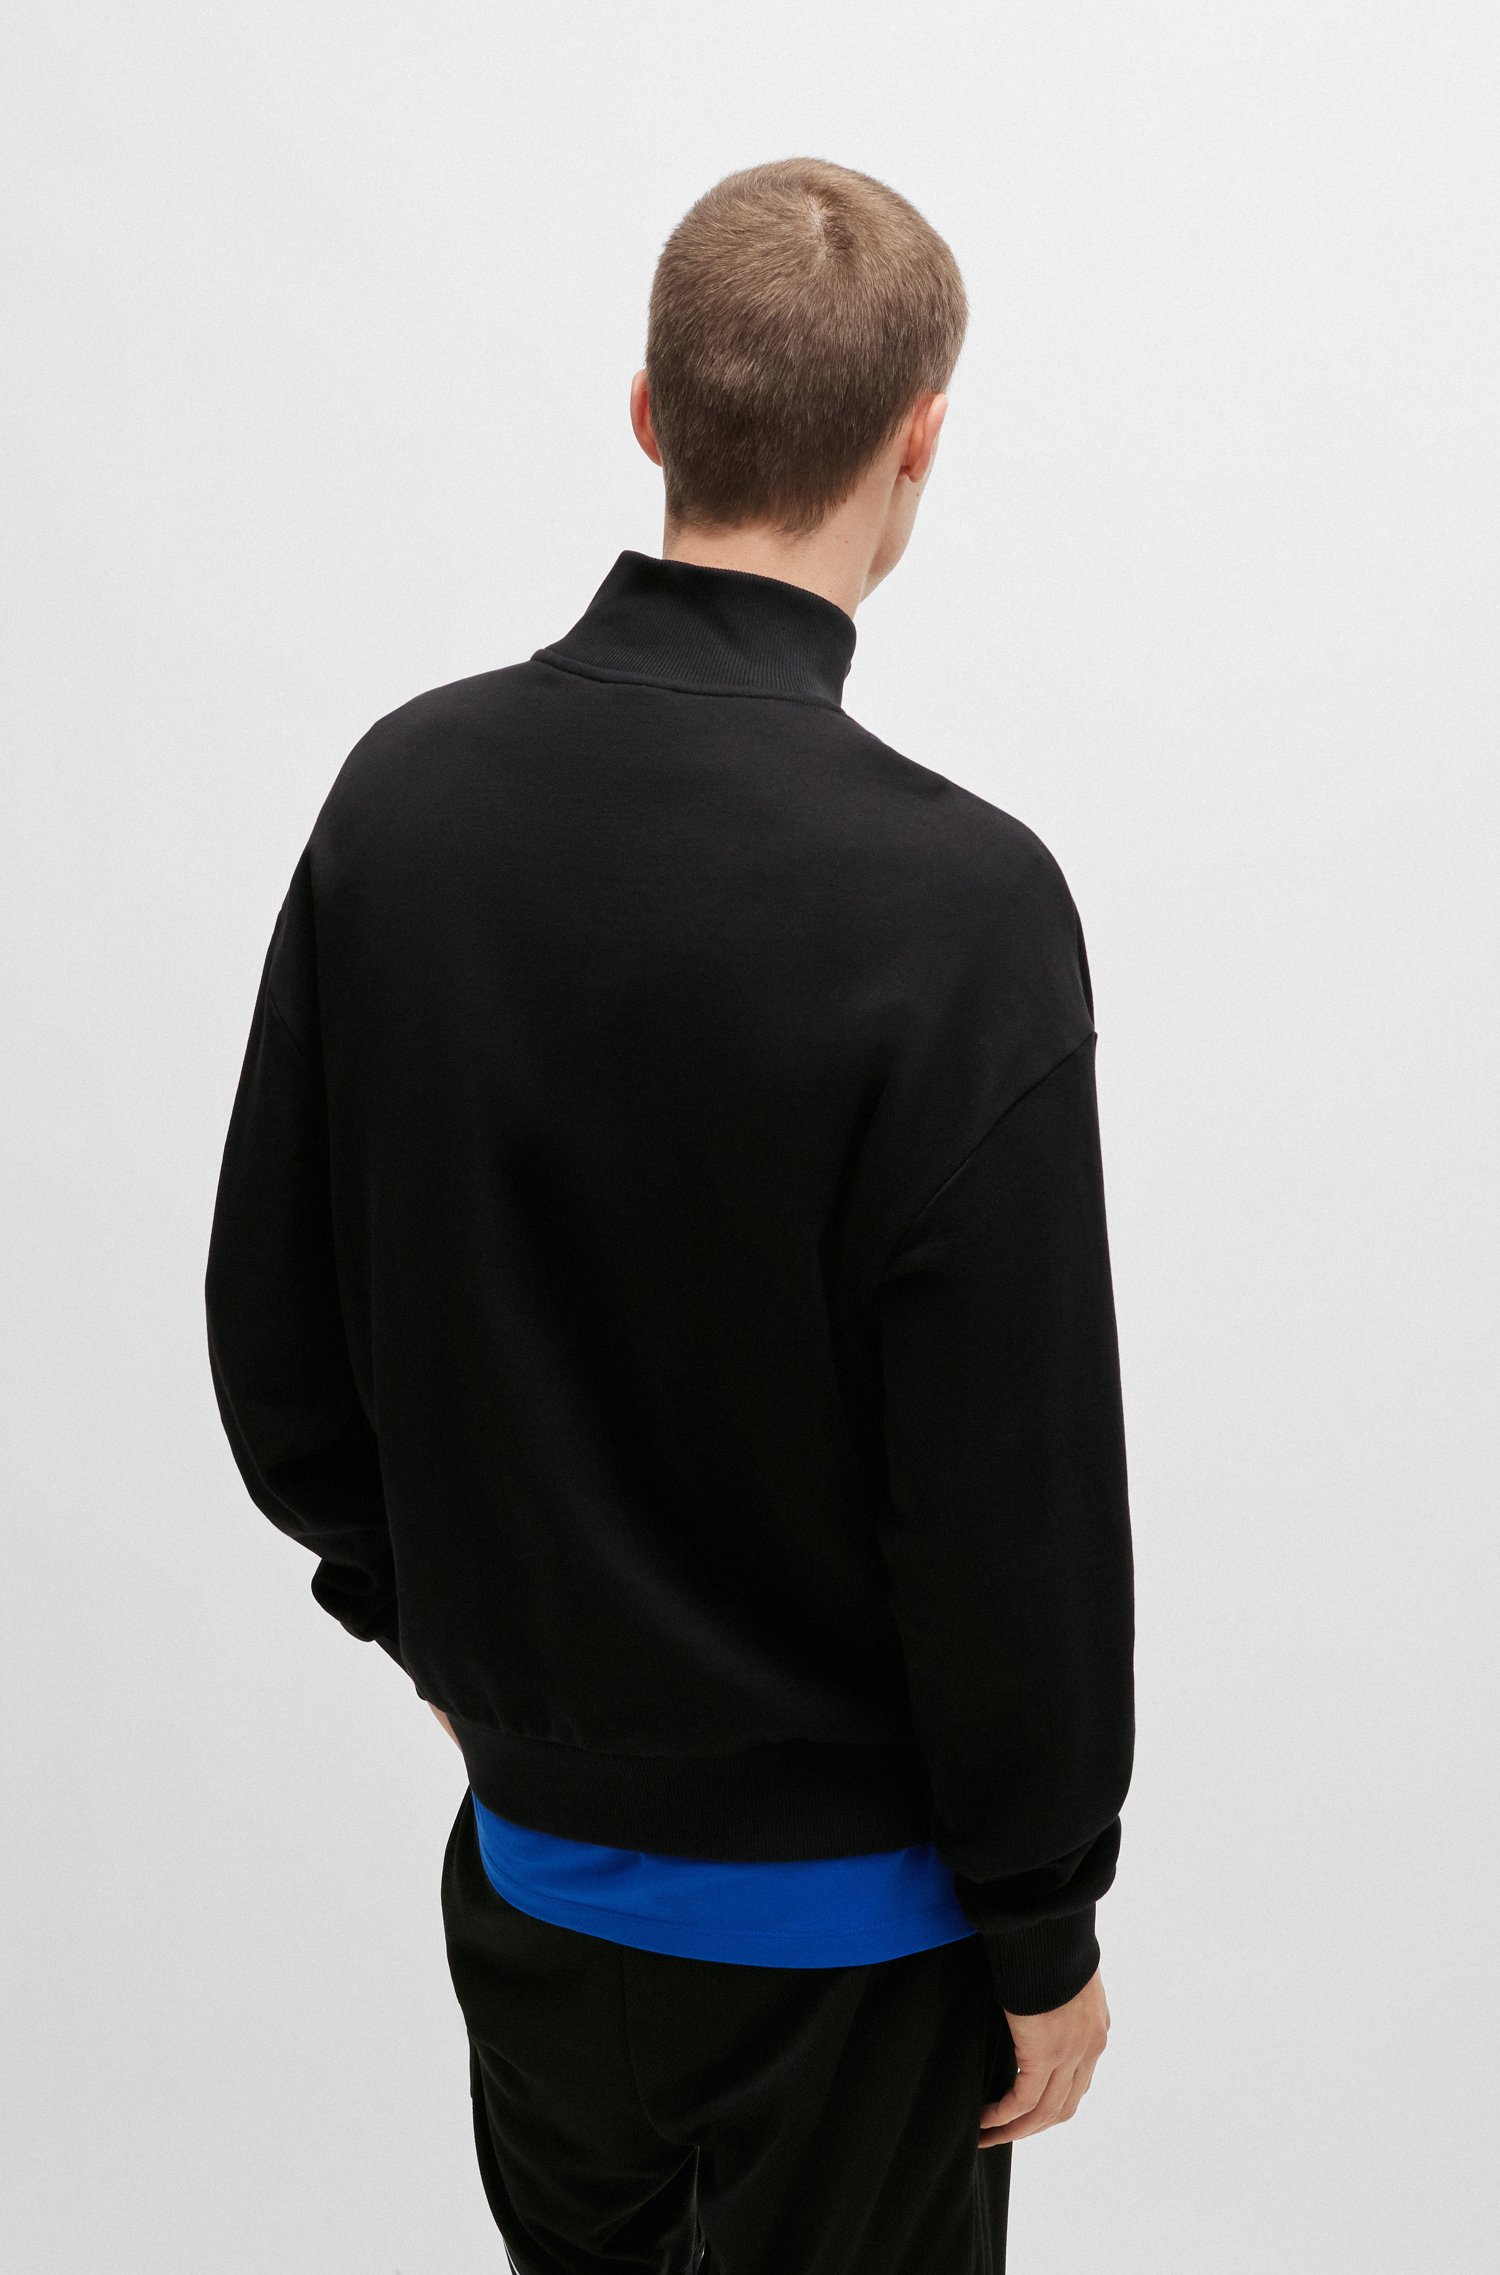 Cotton-terry sweatshirt with zip closure and blue logo